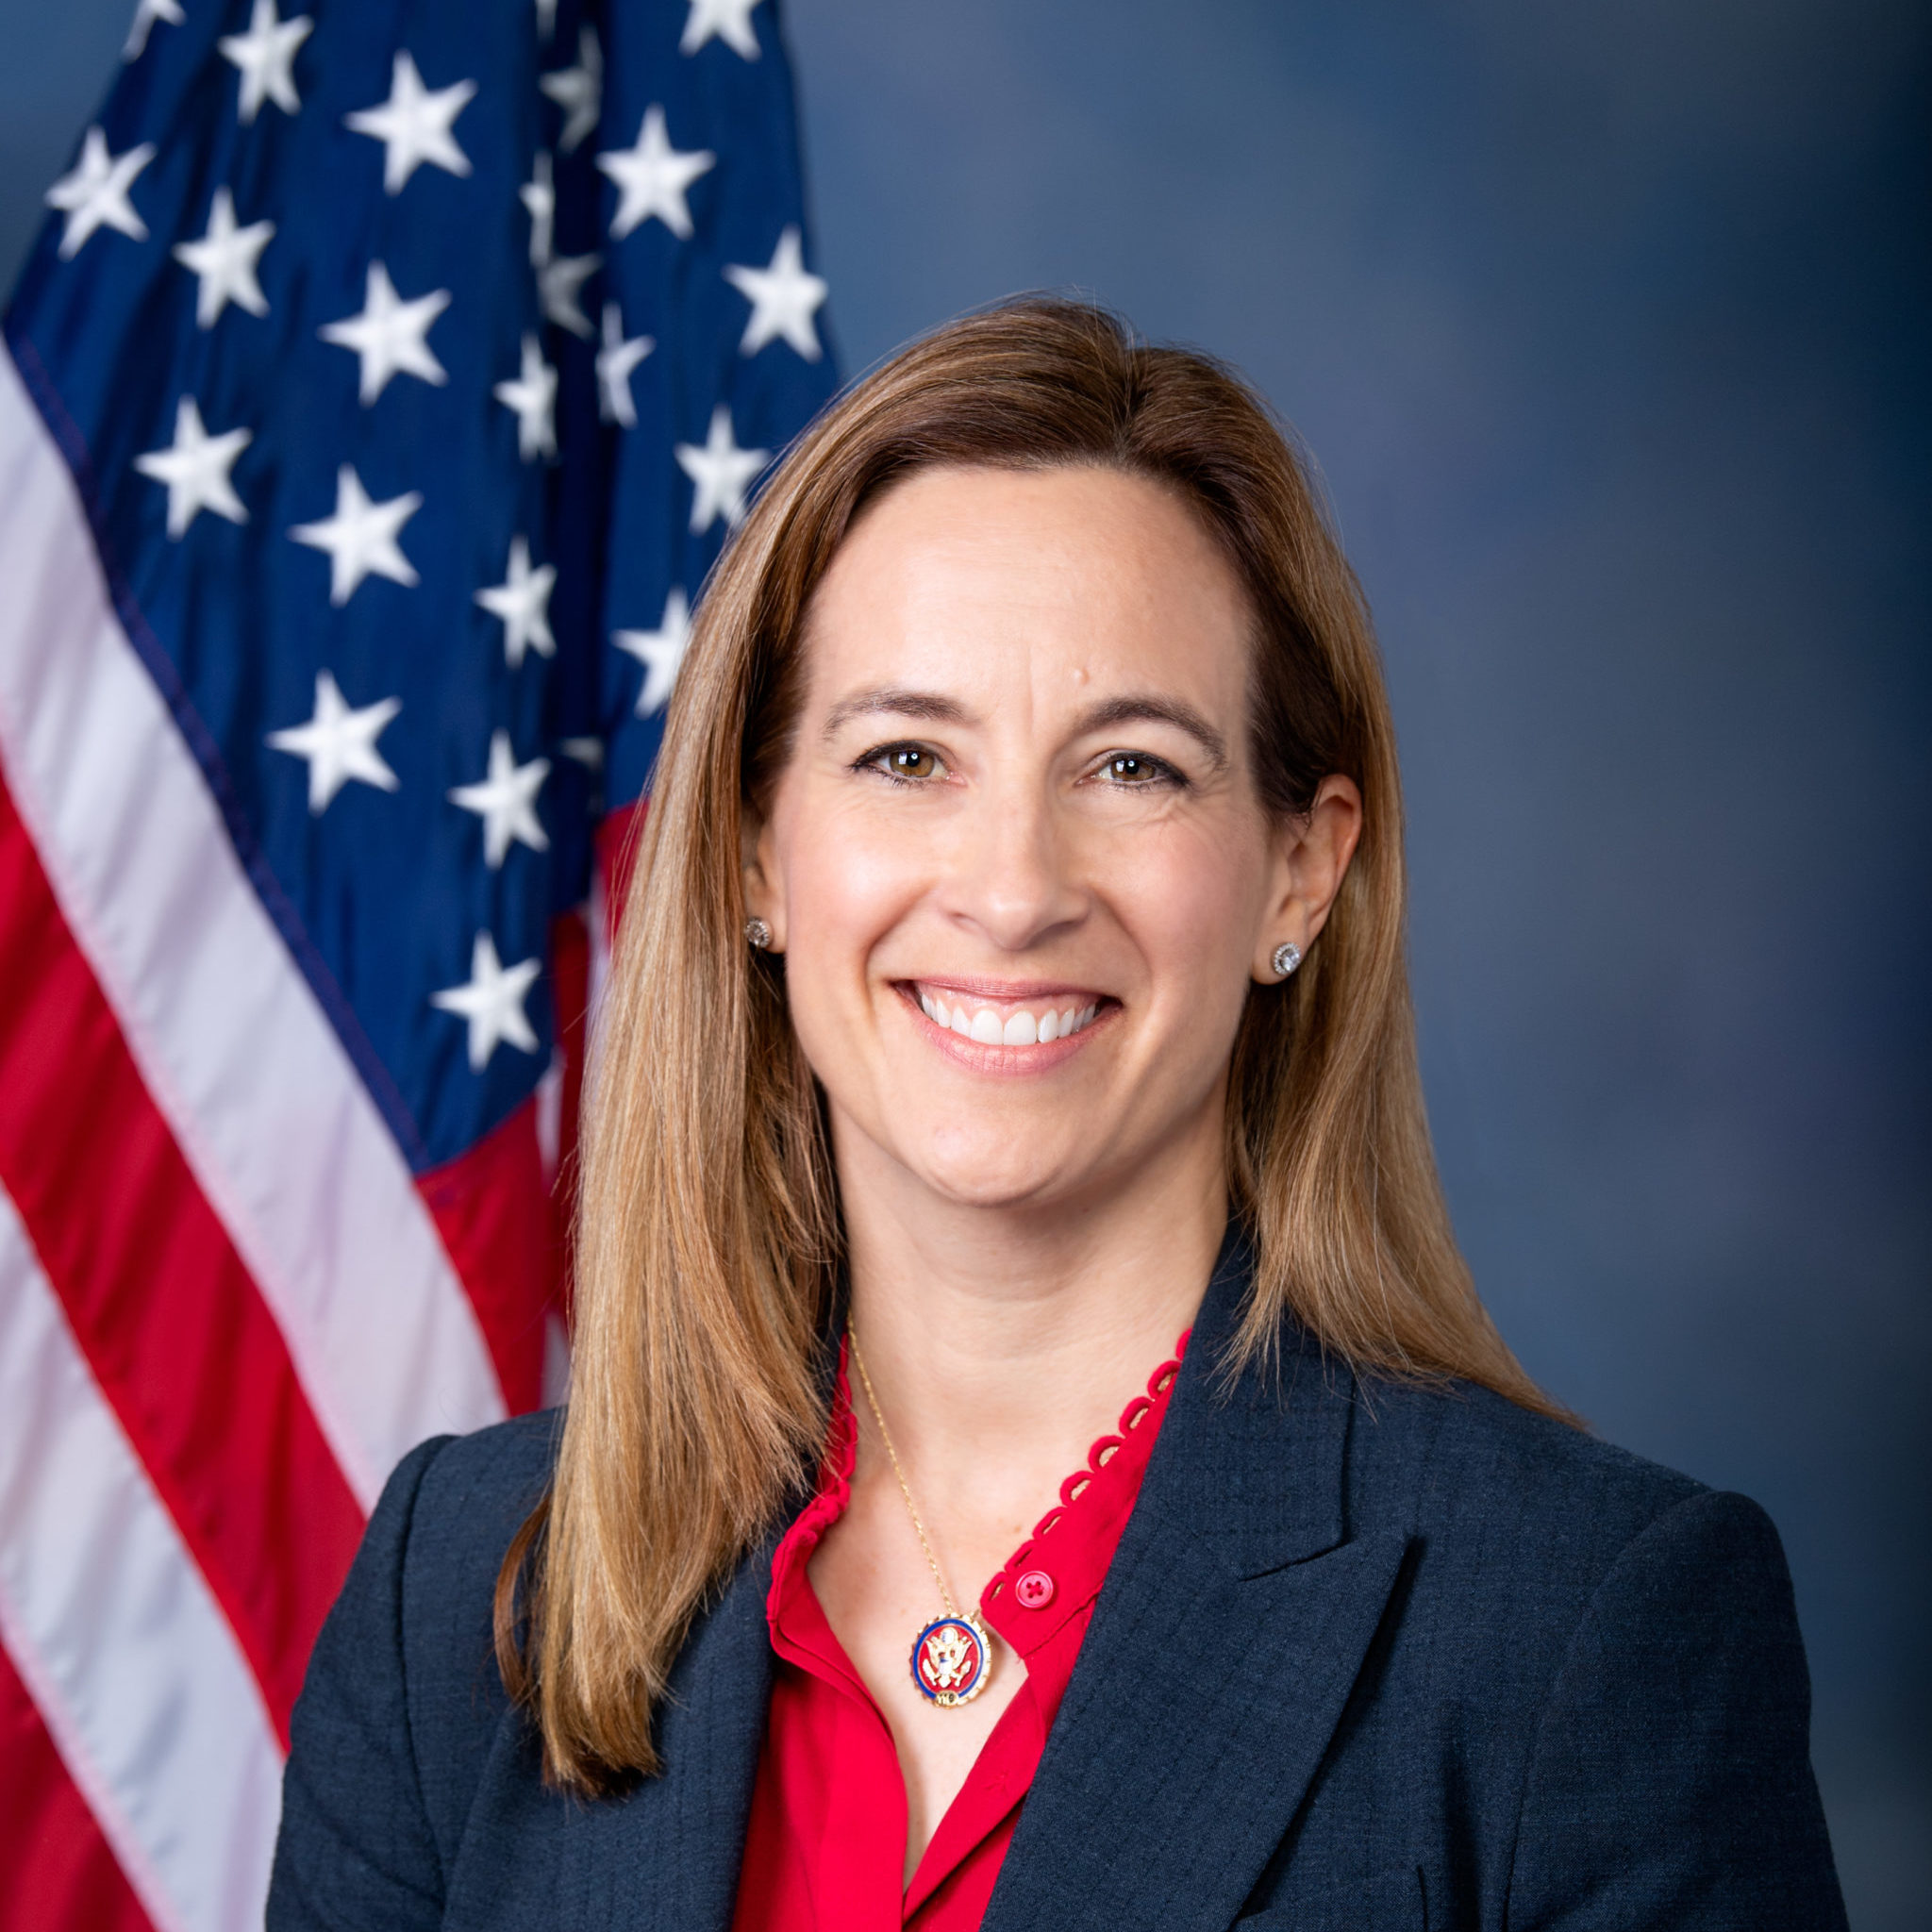 The Honorable Mikie Sherrill